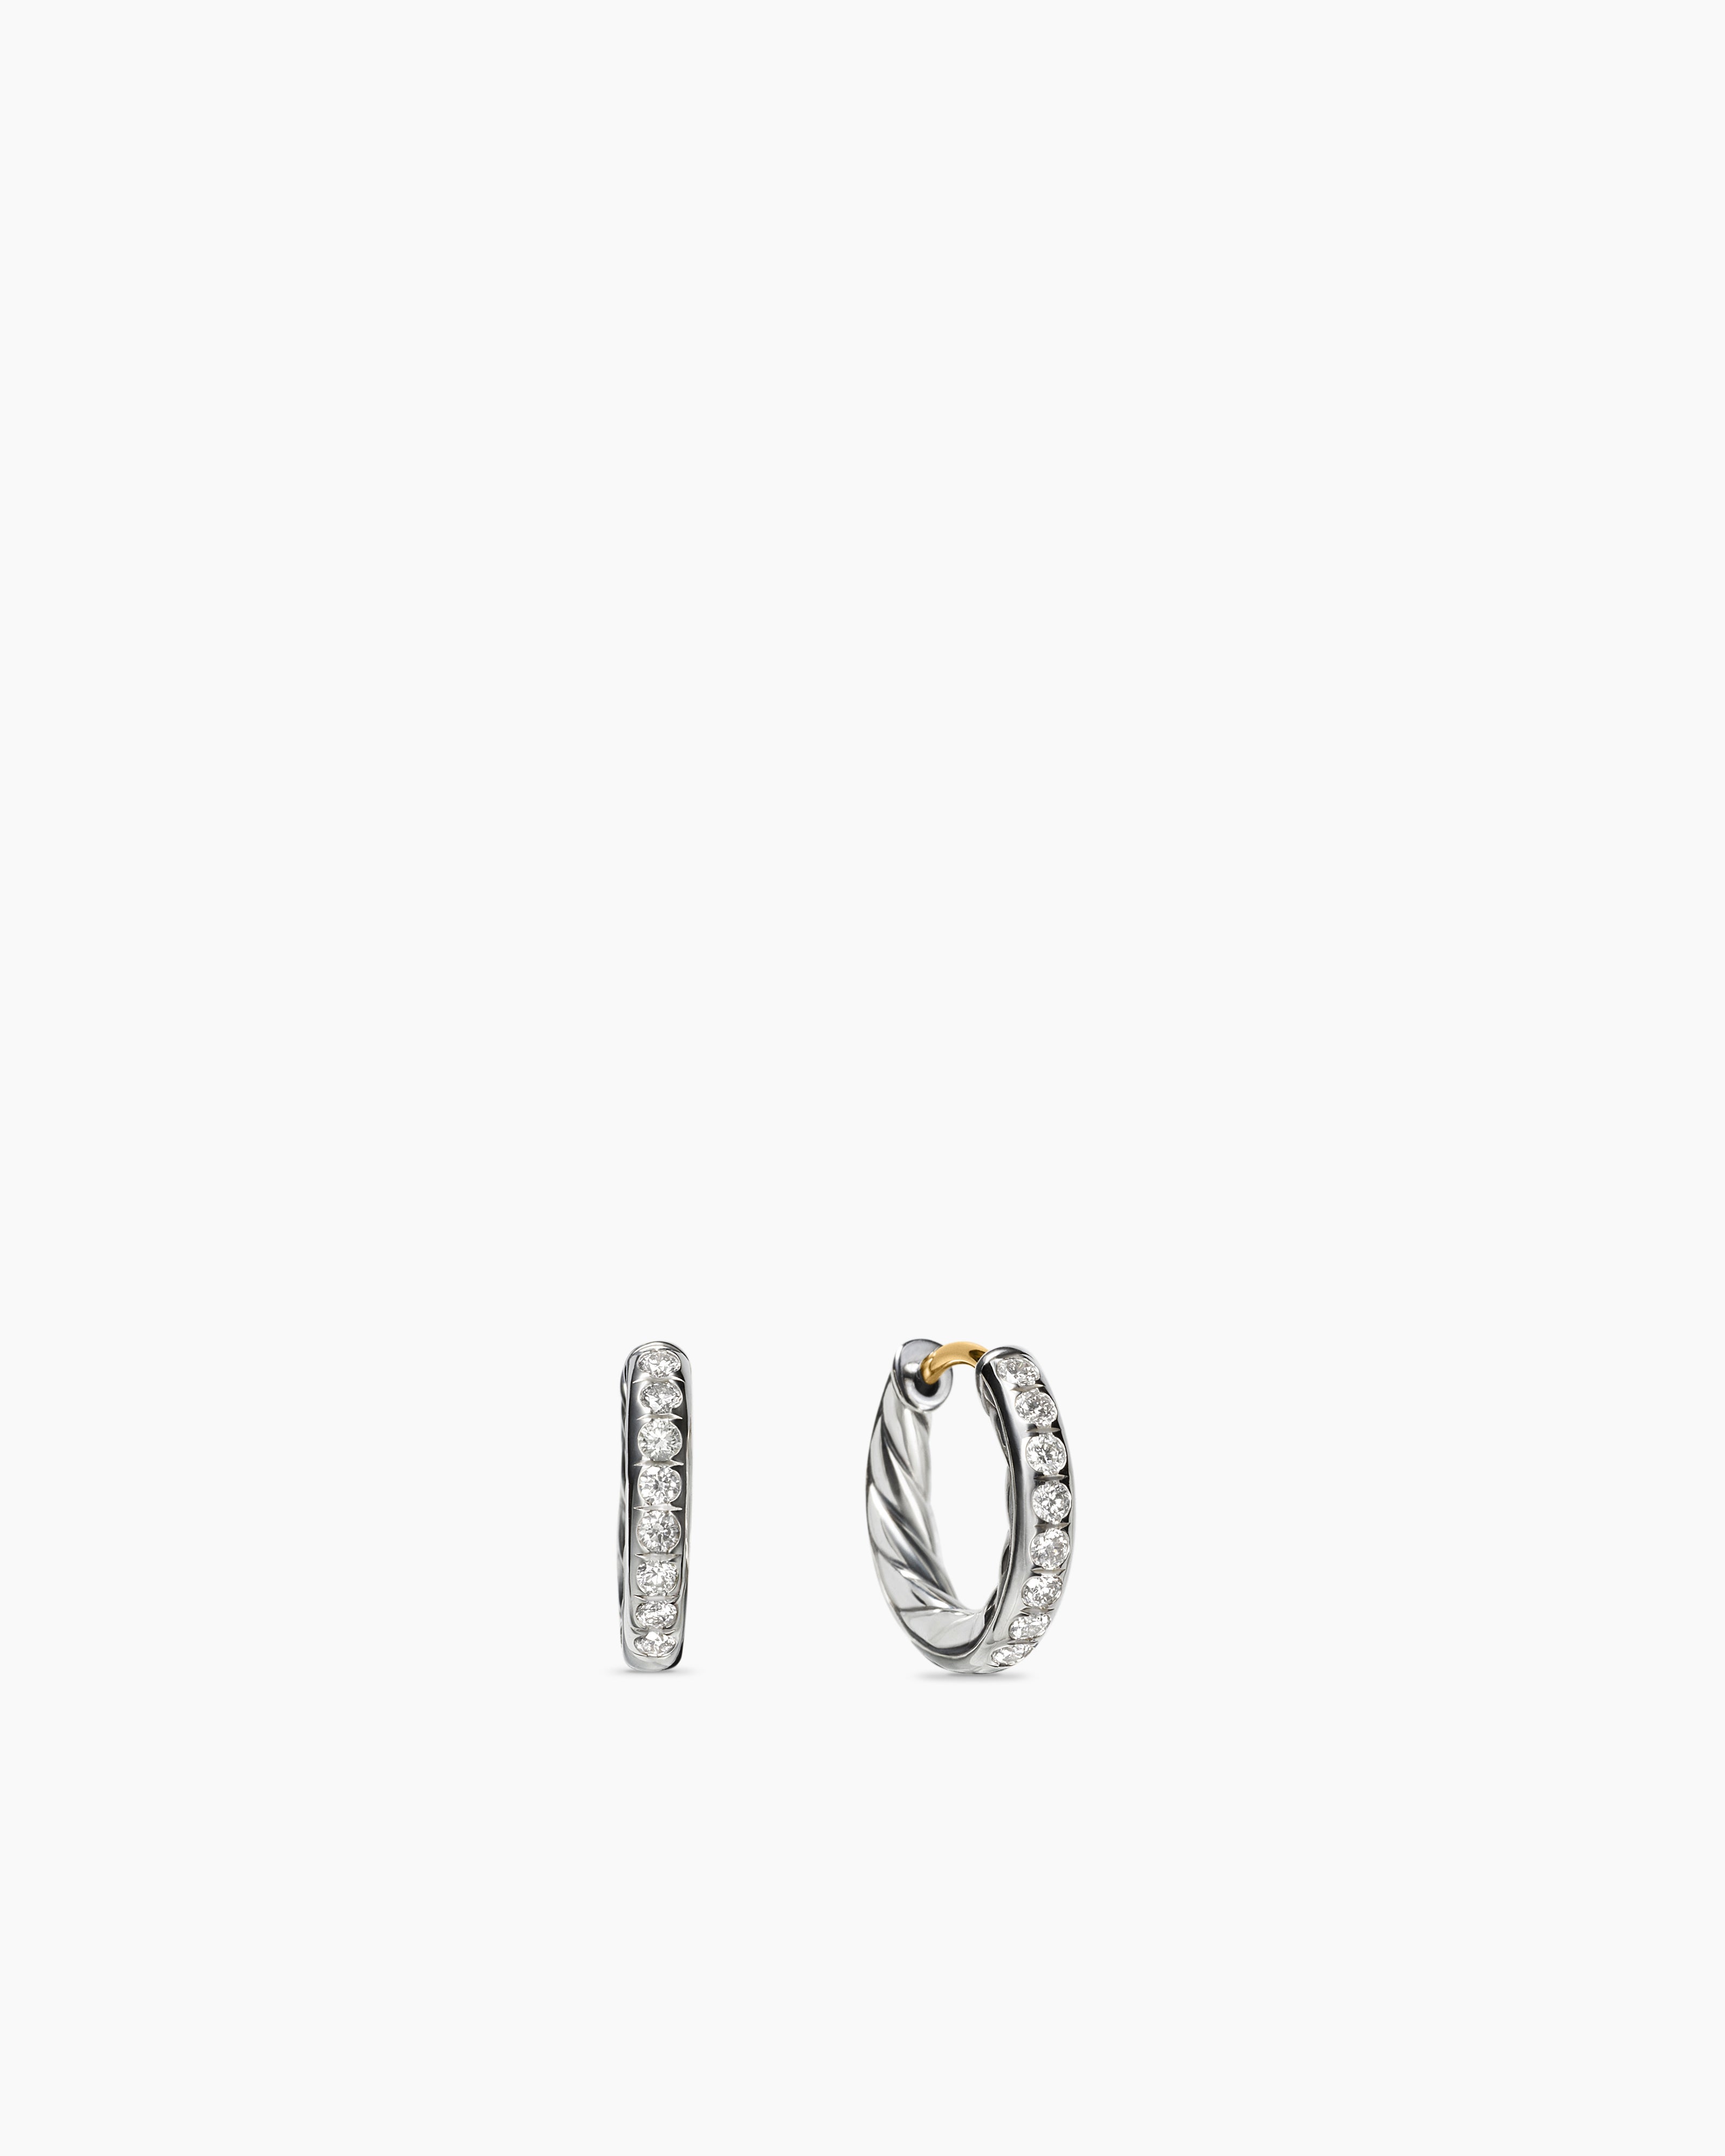 Sculpted Cable Huggie Hoop Earrings  Sterling Silver with Diamonds, 13mm